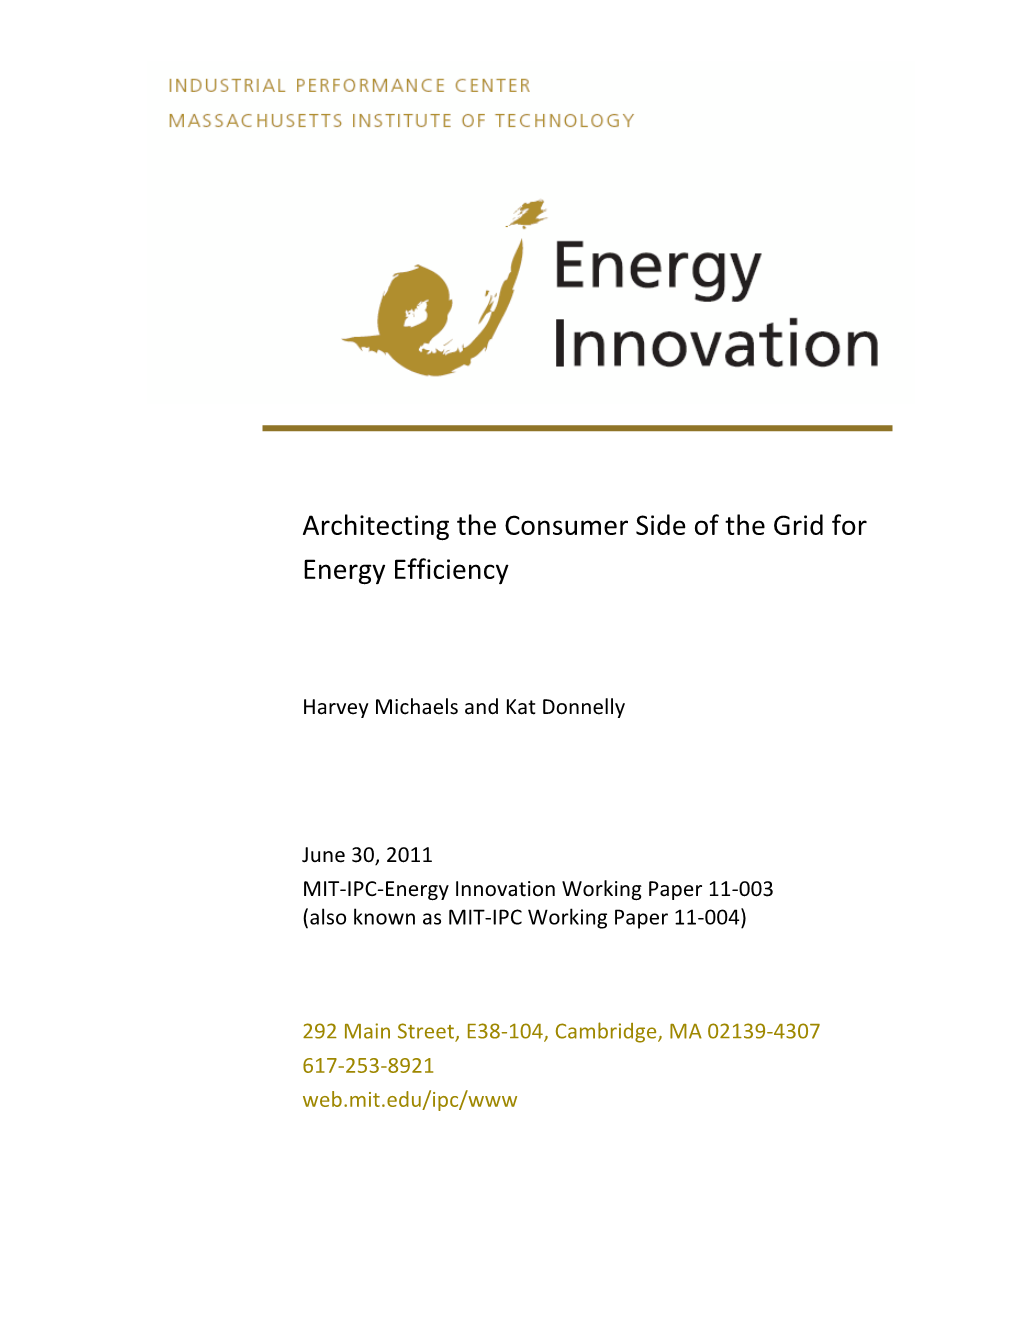 Architecting the Consumer Side of the Grid for Energy Efficiency